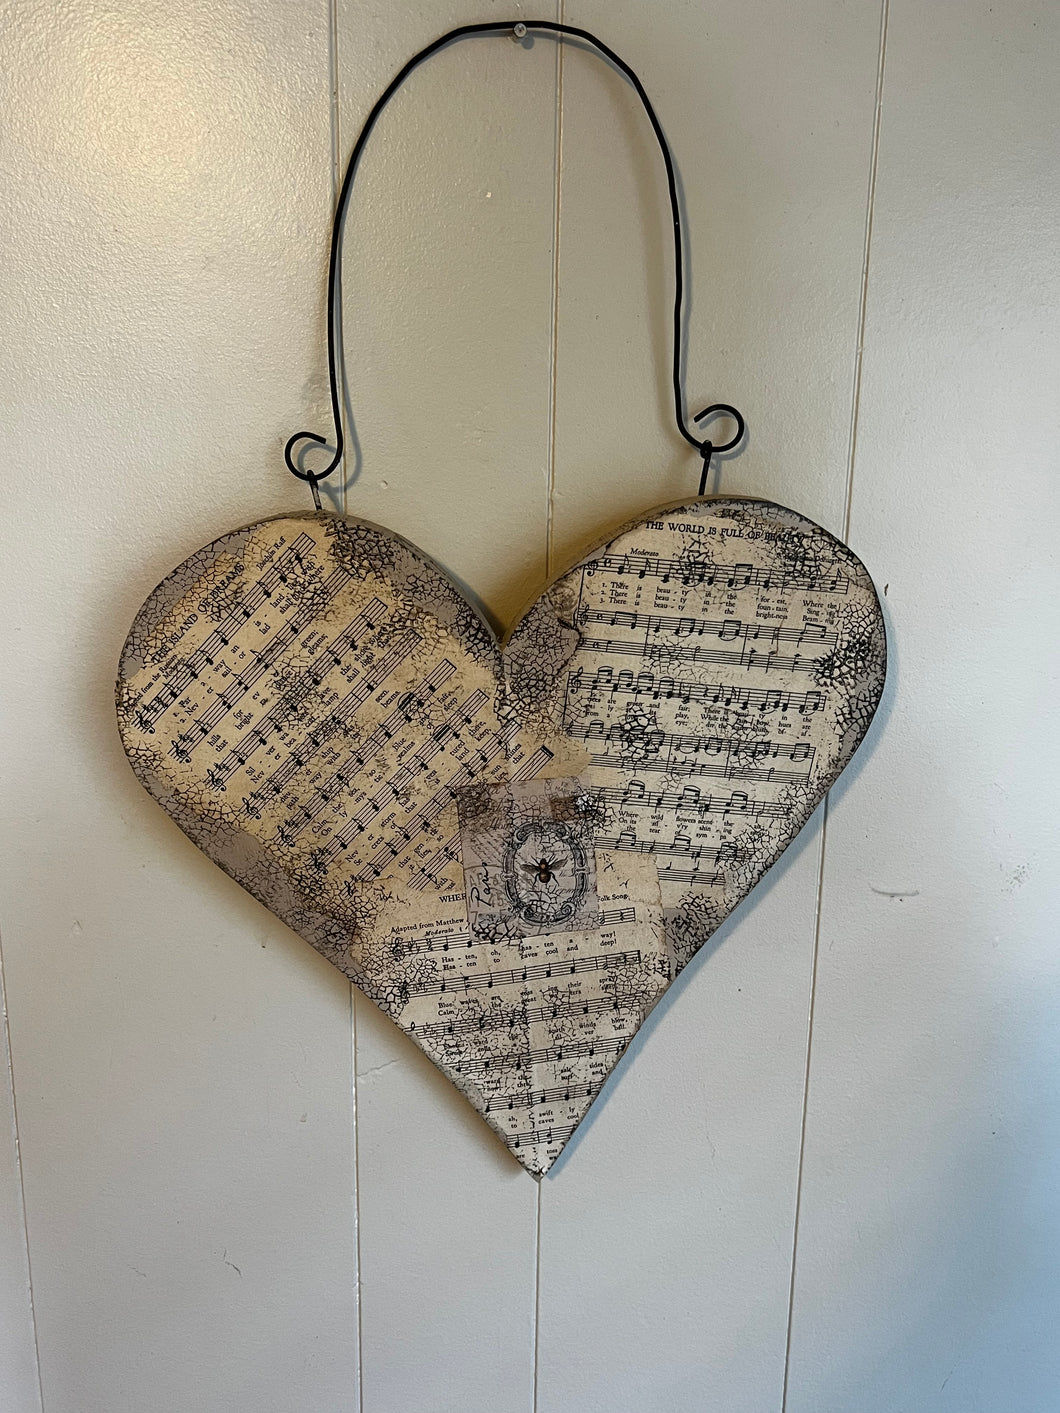 Decoupage heart with hanger